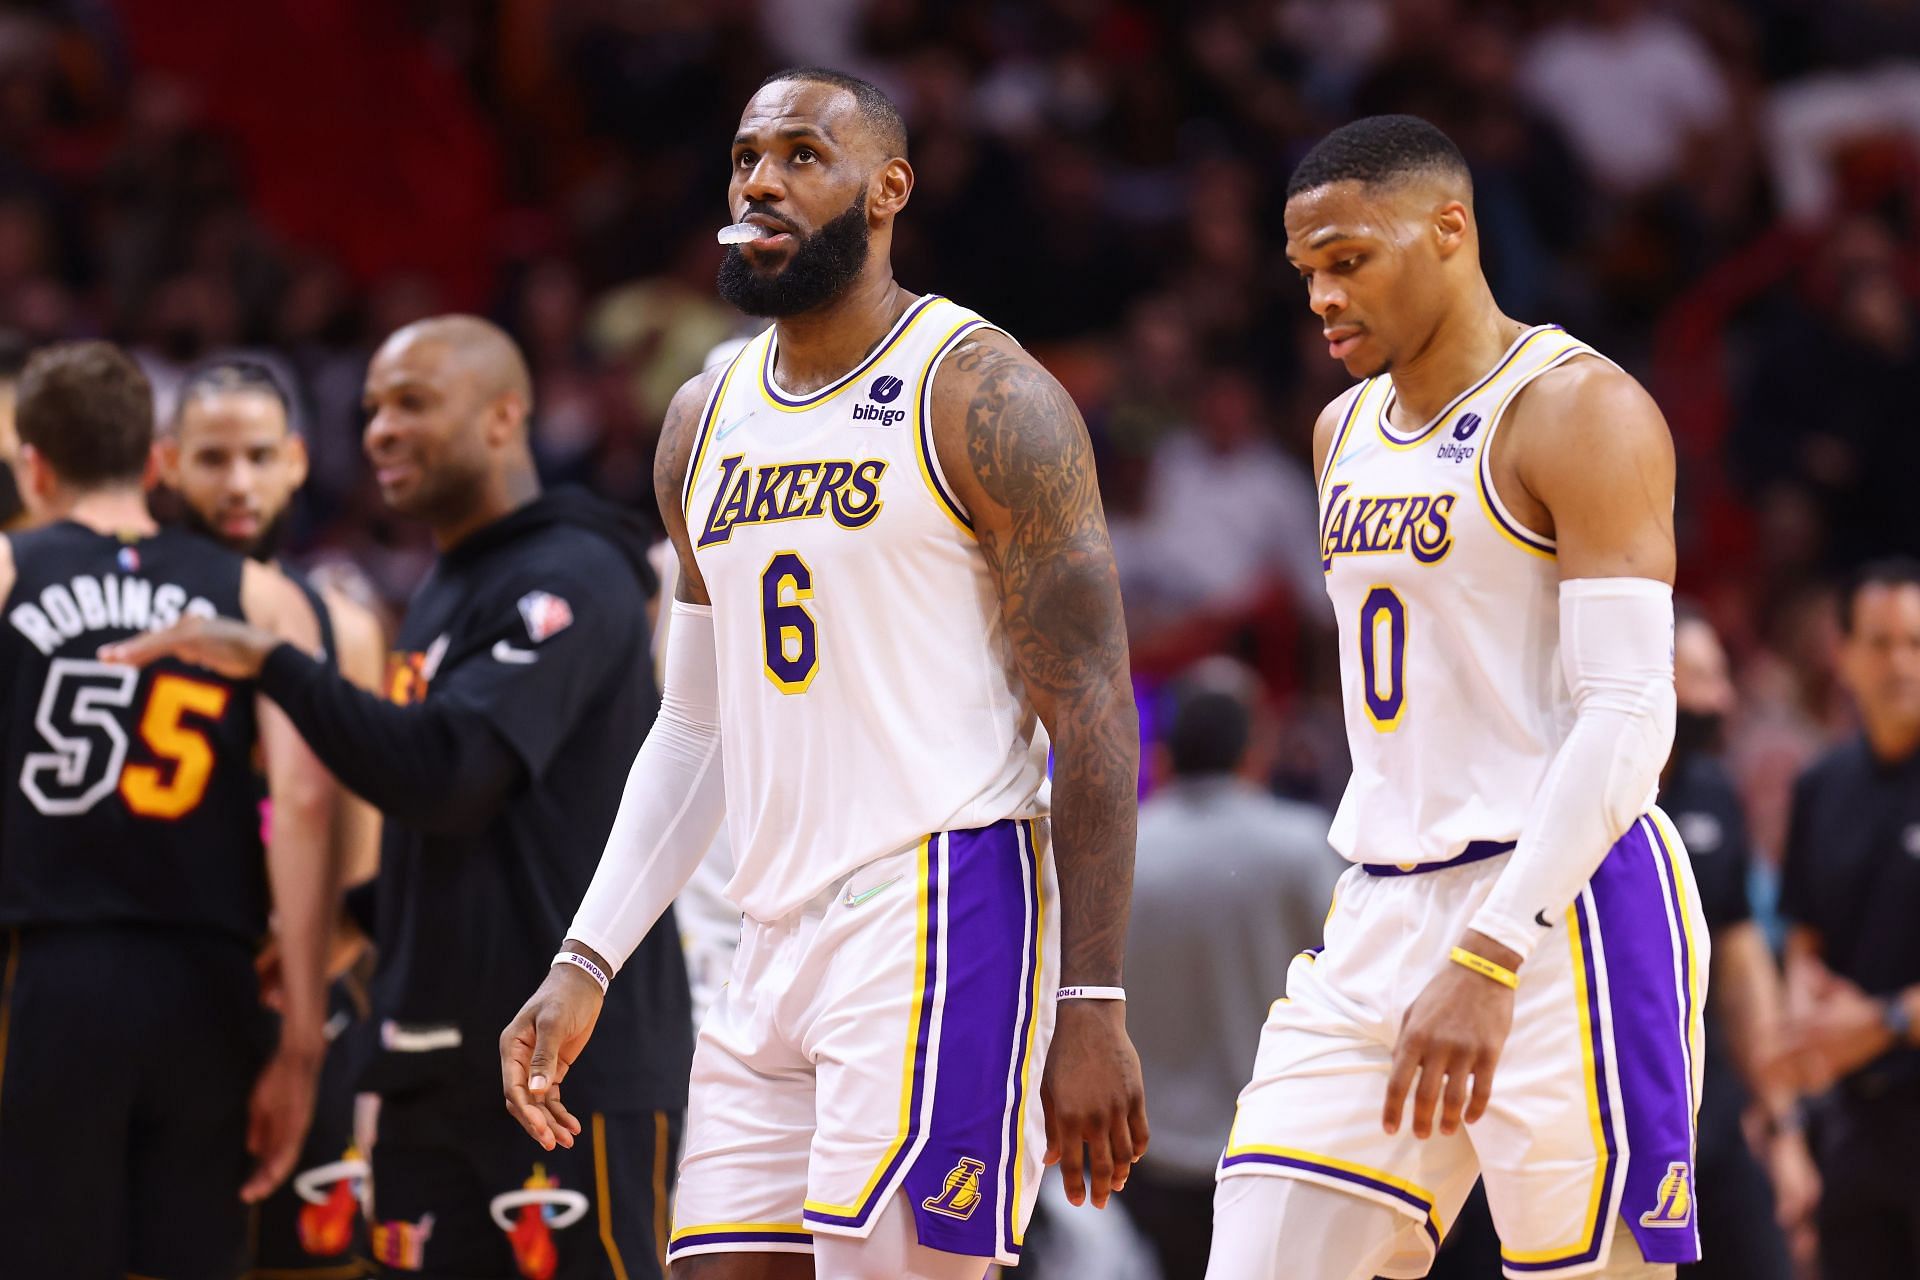 LA Lakers stars LeBron James, left, and Russell Westbrook